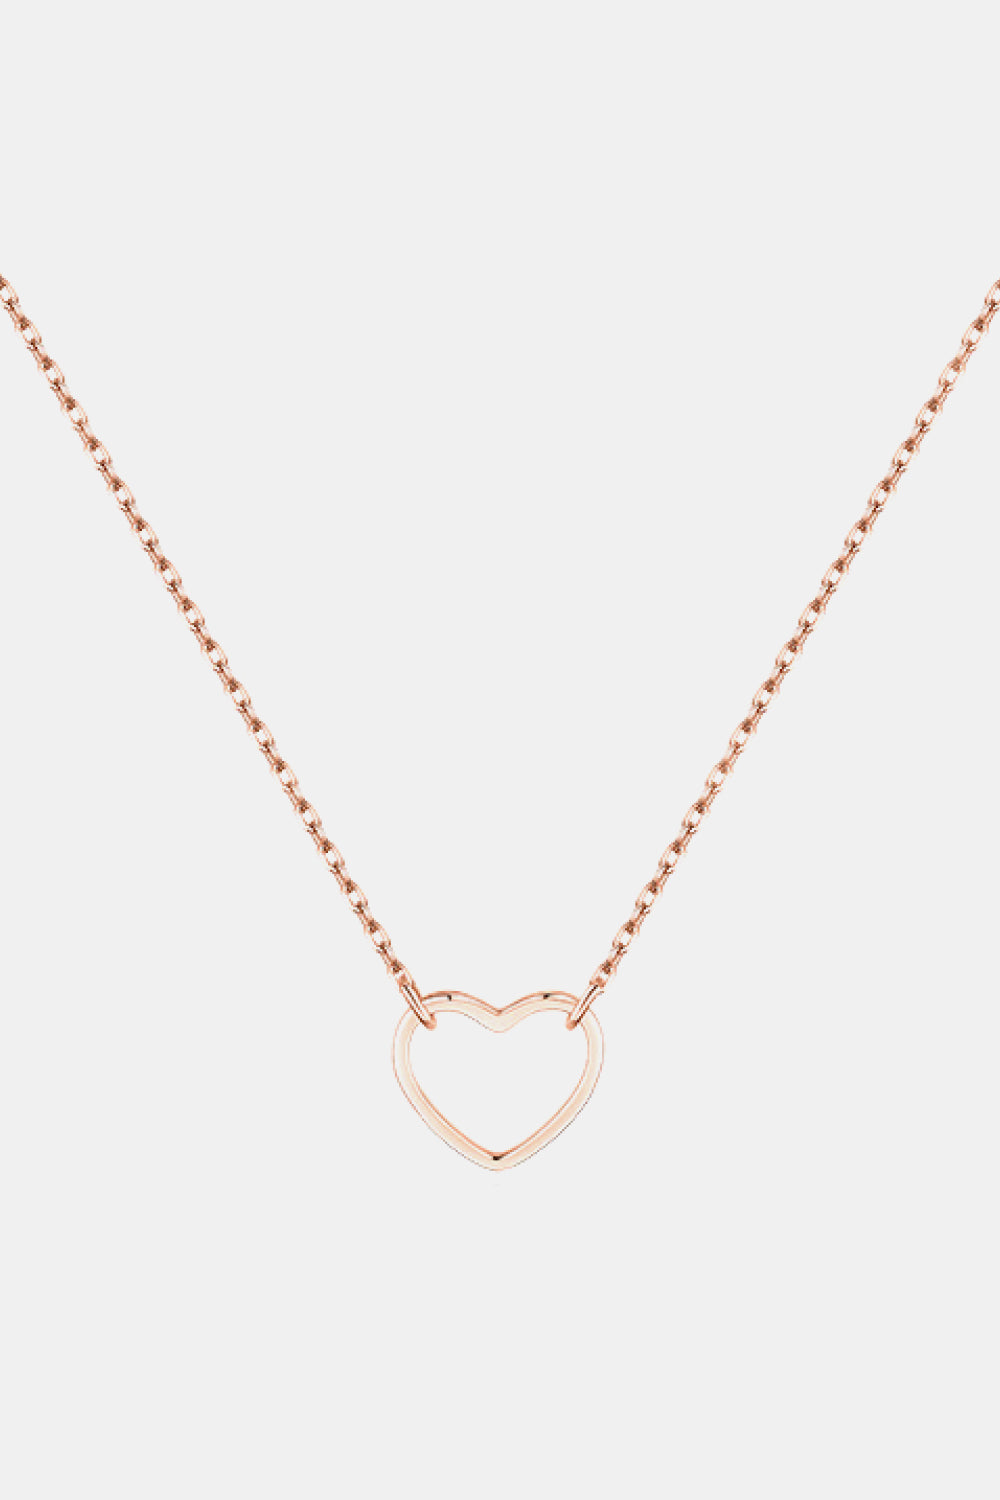 Trendsi Cupid Beauty Supplies Rose Gold / One Size Women Necklace 925 Sterling Silver Heart Shape Pendant Necklace